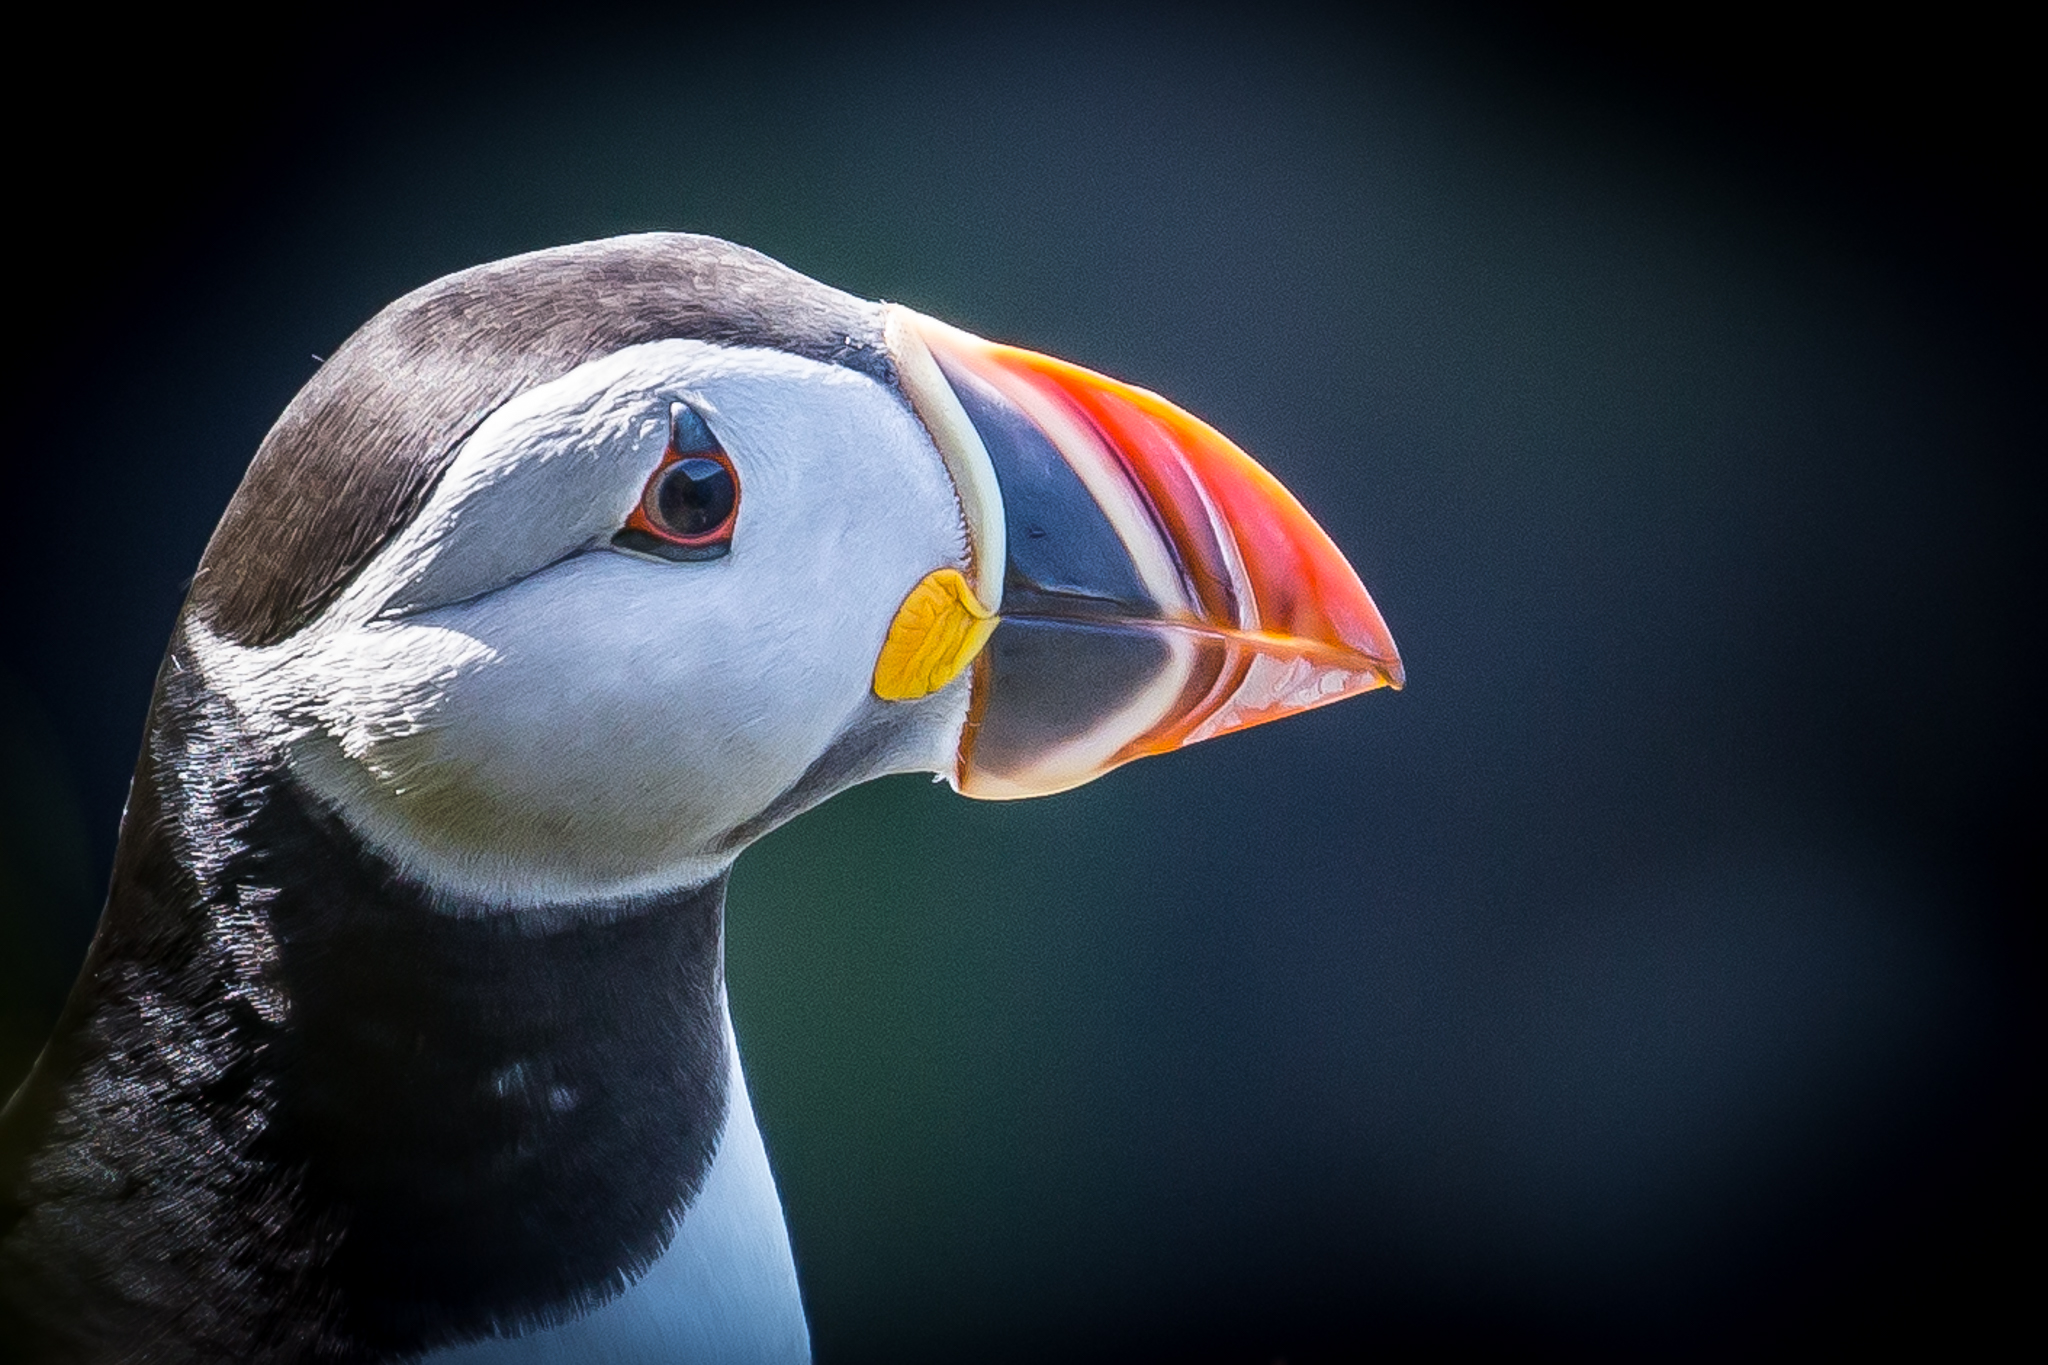 Puffin in Orkney - image by Dawn Underhill